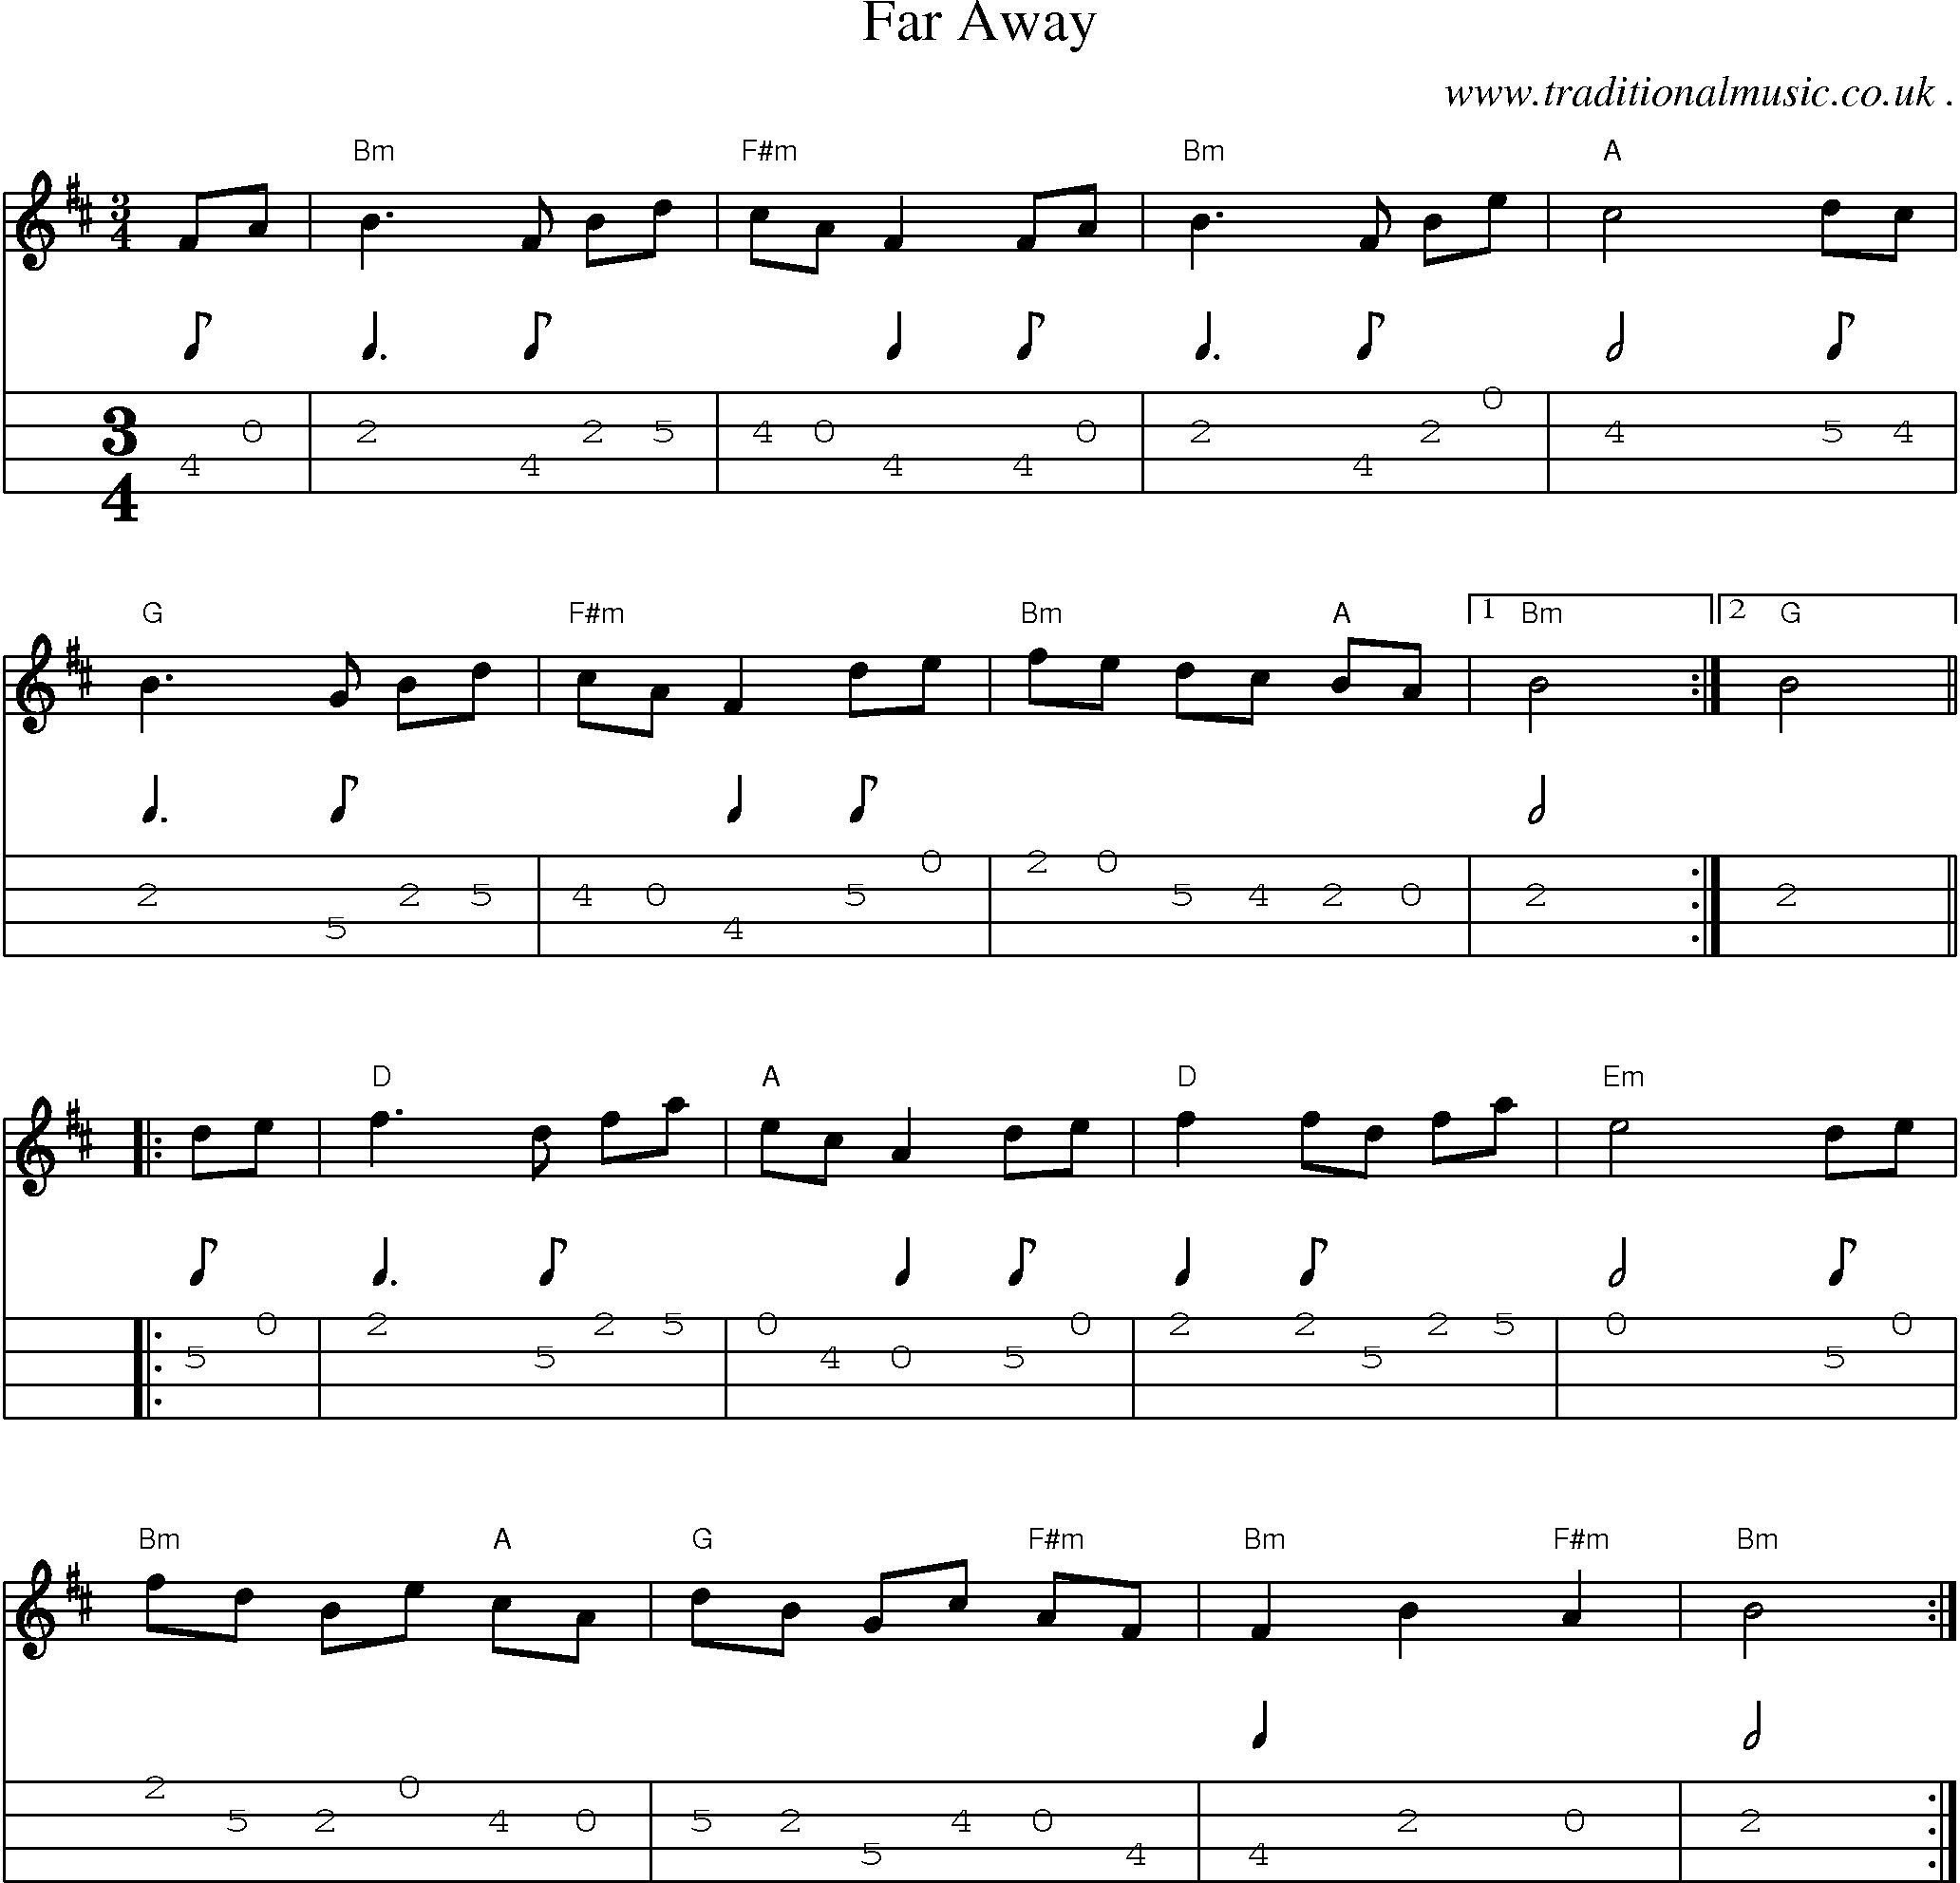 Music Score and Guitar Tabs for Far Away